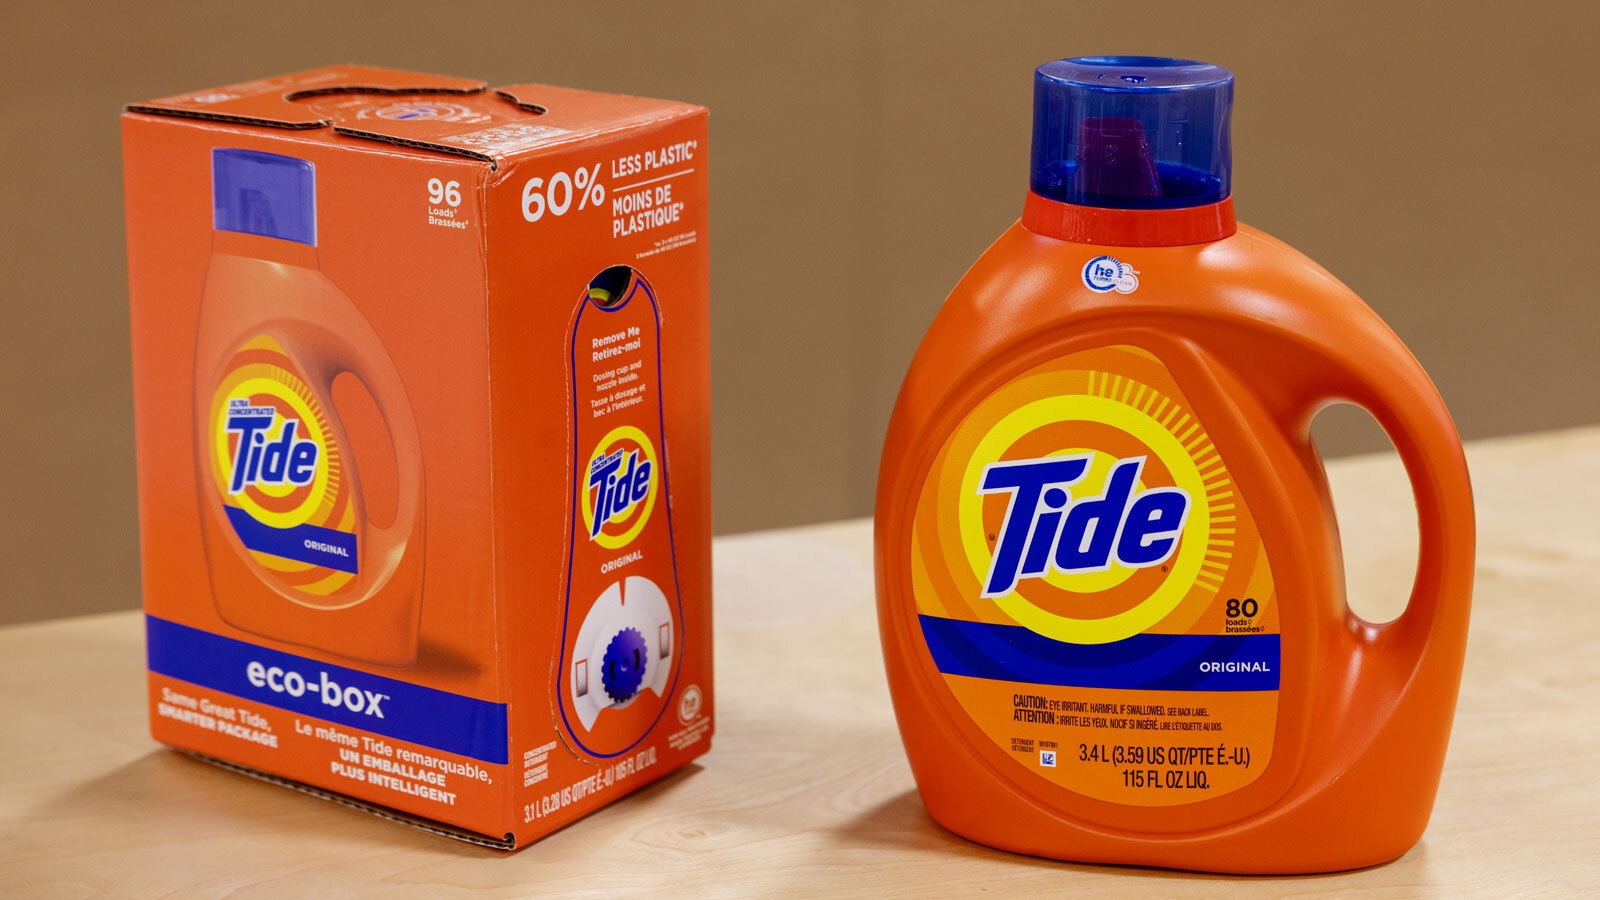 An image of two packages of Tide clothing detergent. One is a box with a spout on it and the other is a plastic bottle.